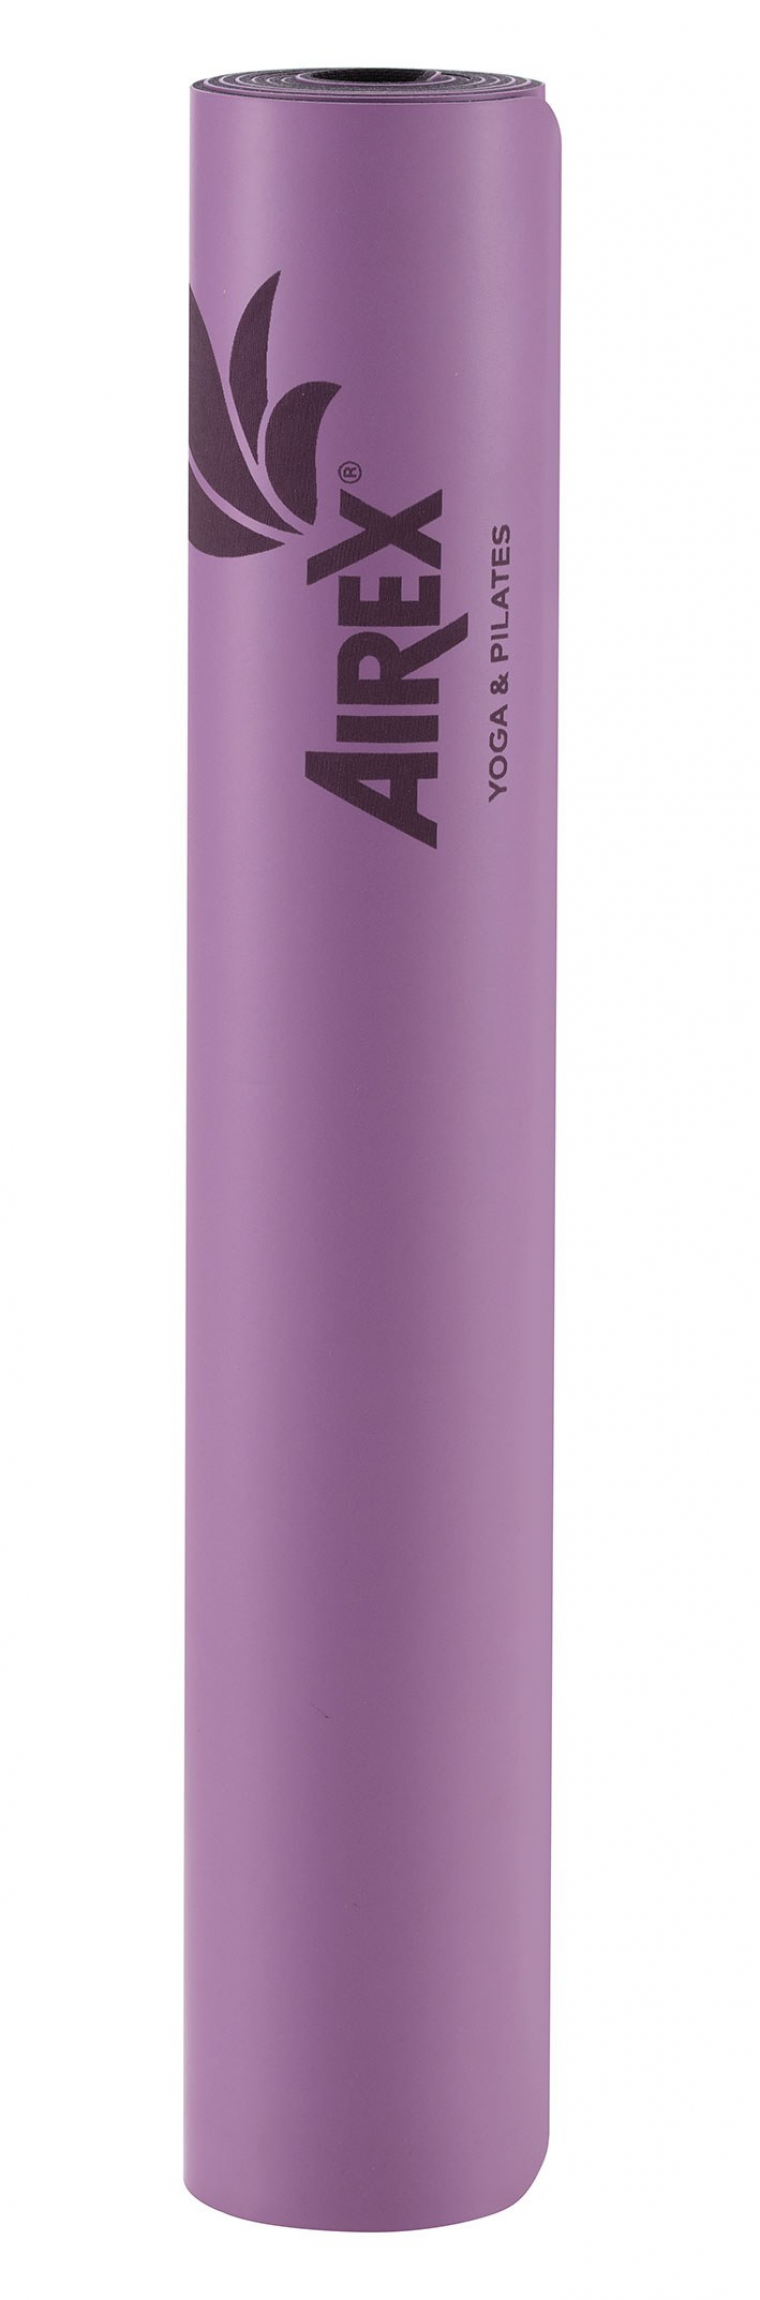 https://my-airex.com/assets/images/products/_productAsset/1_AIREX-Yoga-ECO-Grip-Mat-rolled-purple.jpg